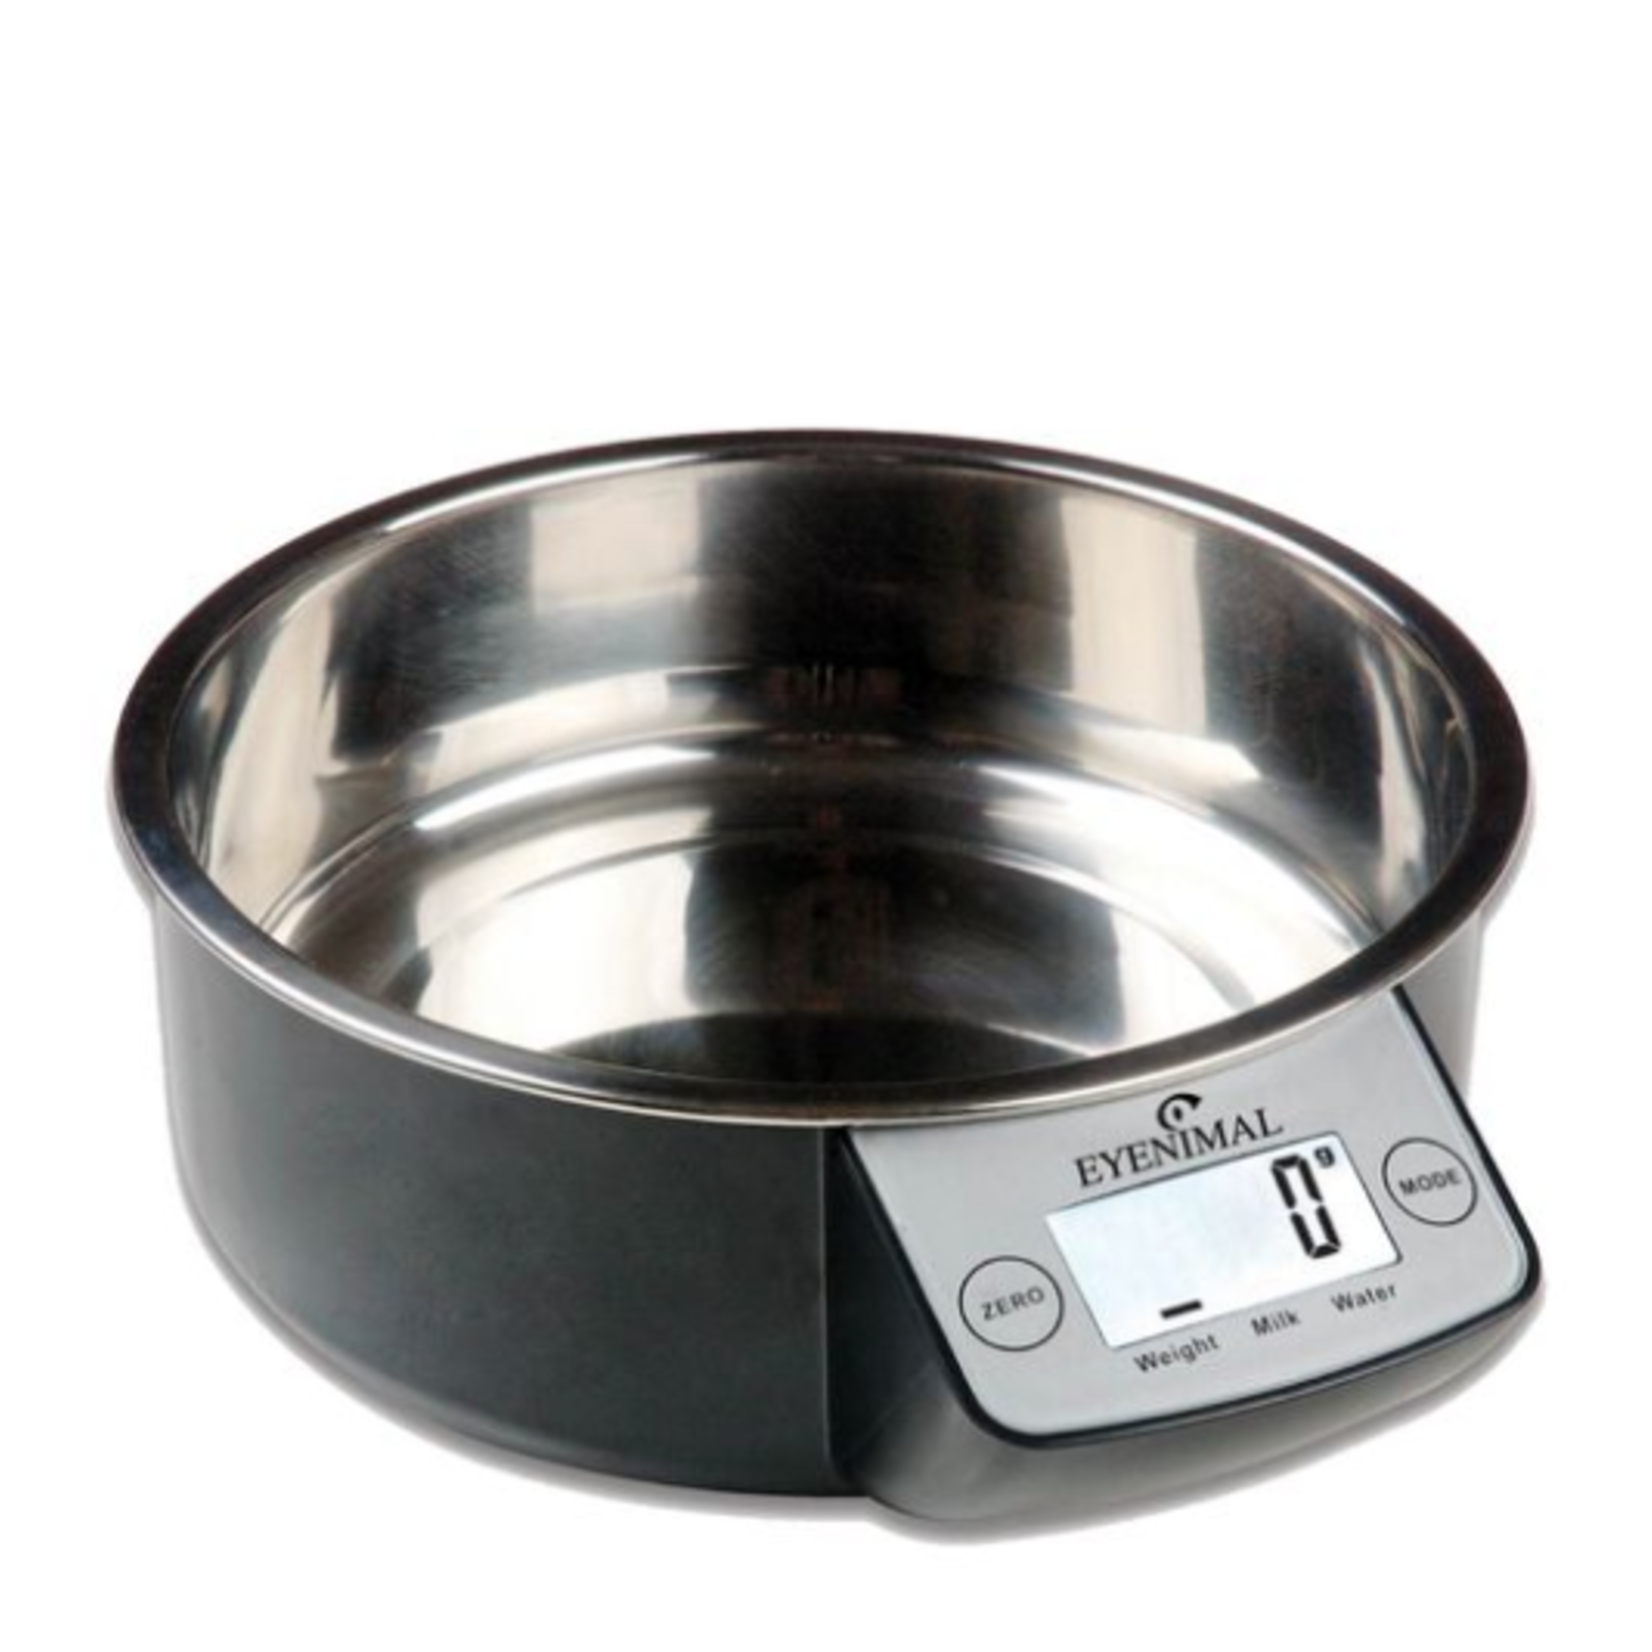 Eyenimal Intelligent Pet Bowl with Integrated Electronic Scale - 2 in 1